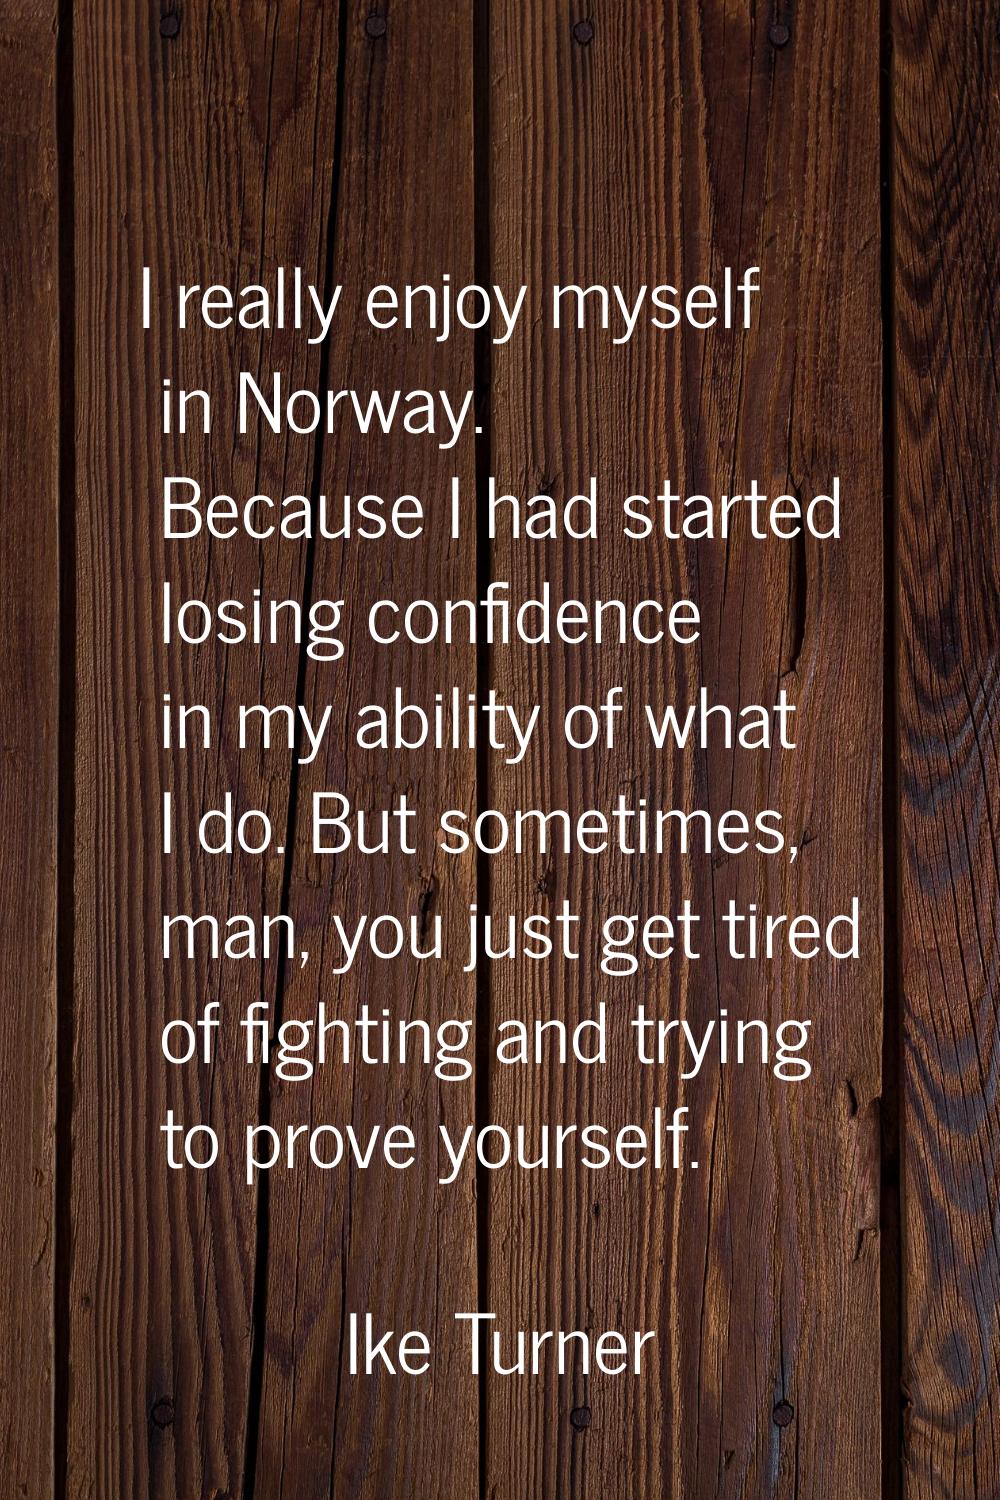 I really enjoy myself in Norway. Because I had started losing confidence in my ability of what I do